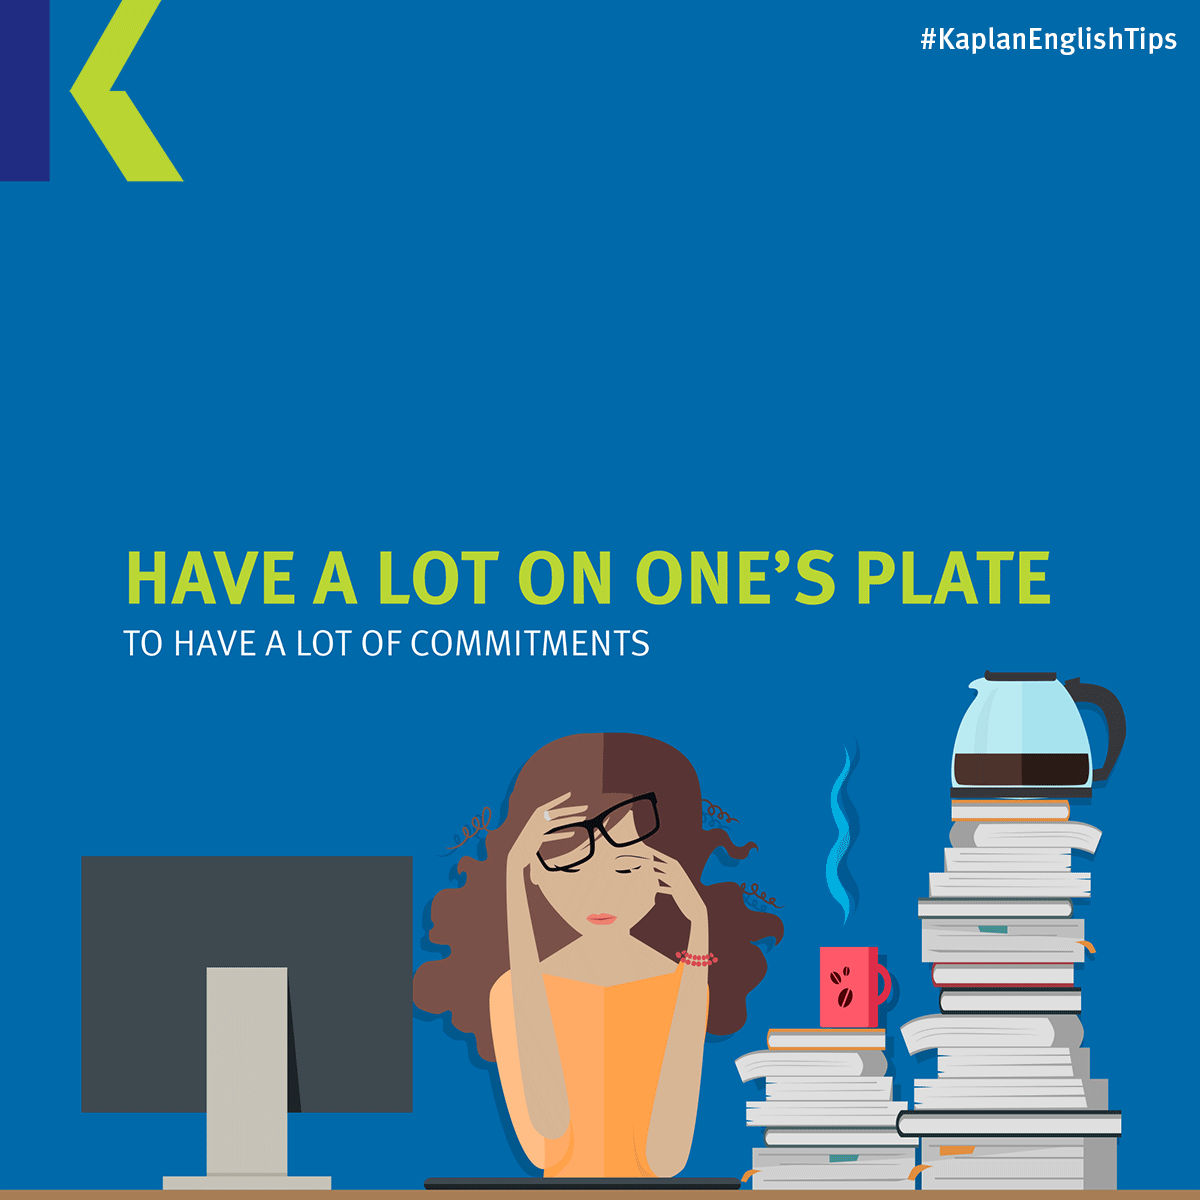 Have a lot on the Plate. A lot on one's Plate. Have a lot on my Plate. Have a lot on one's Plate idiom. Have a thing going with